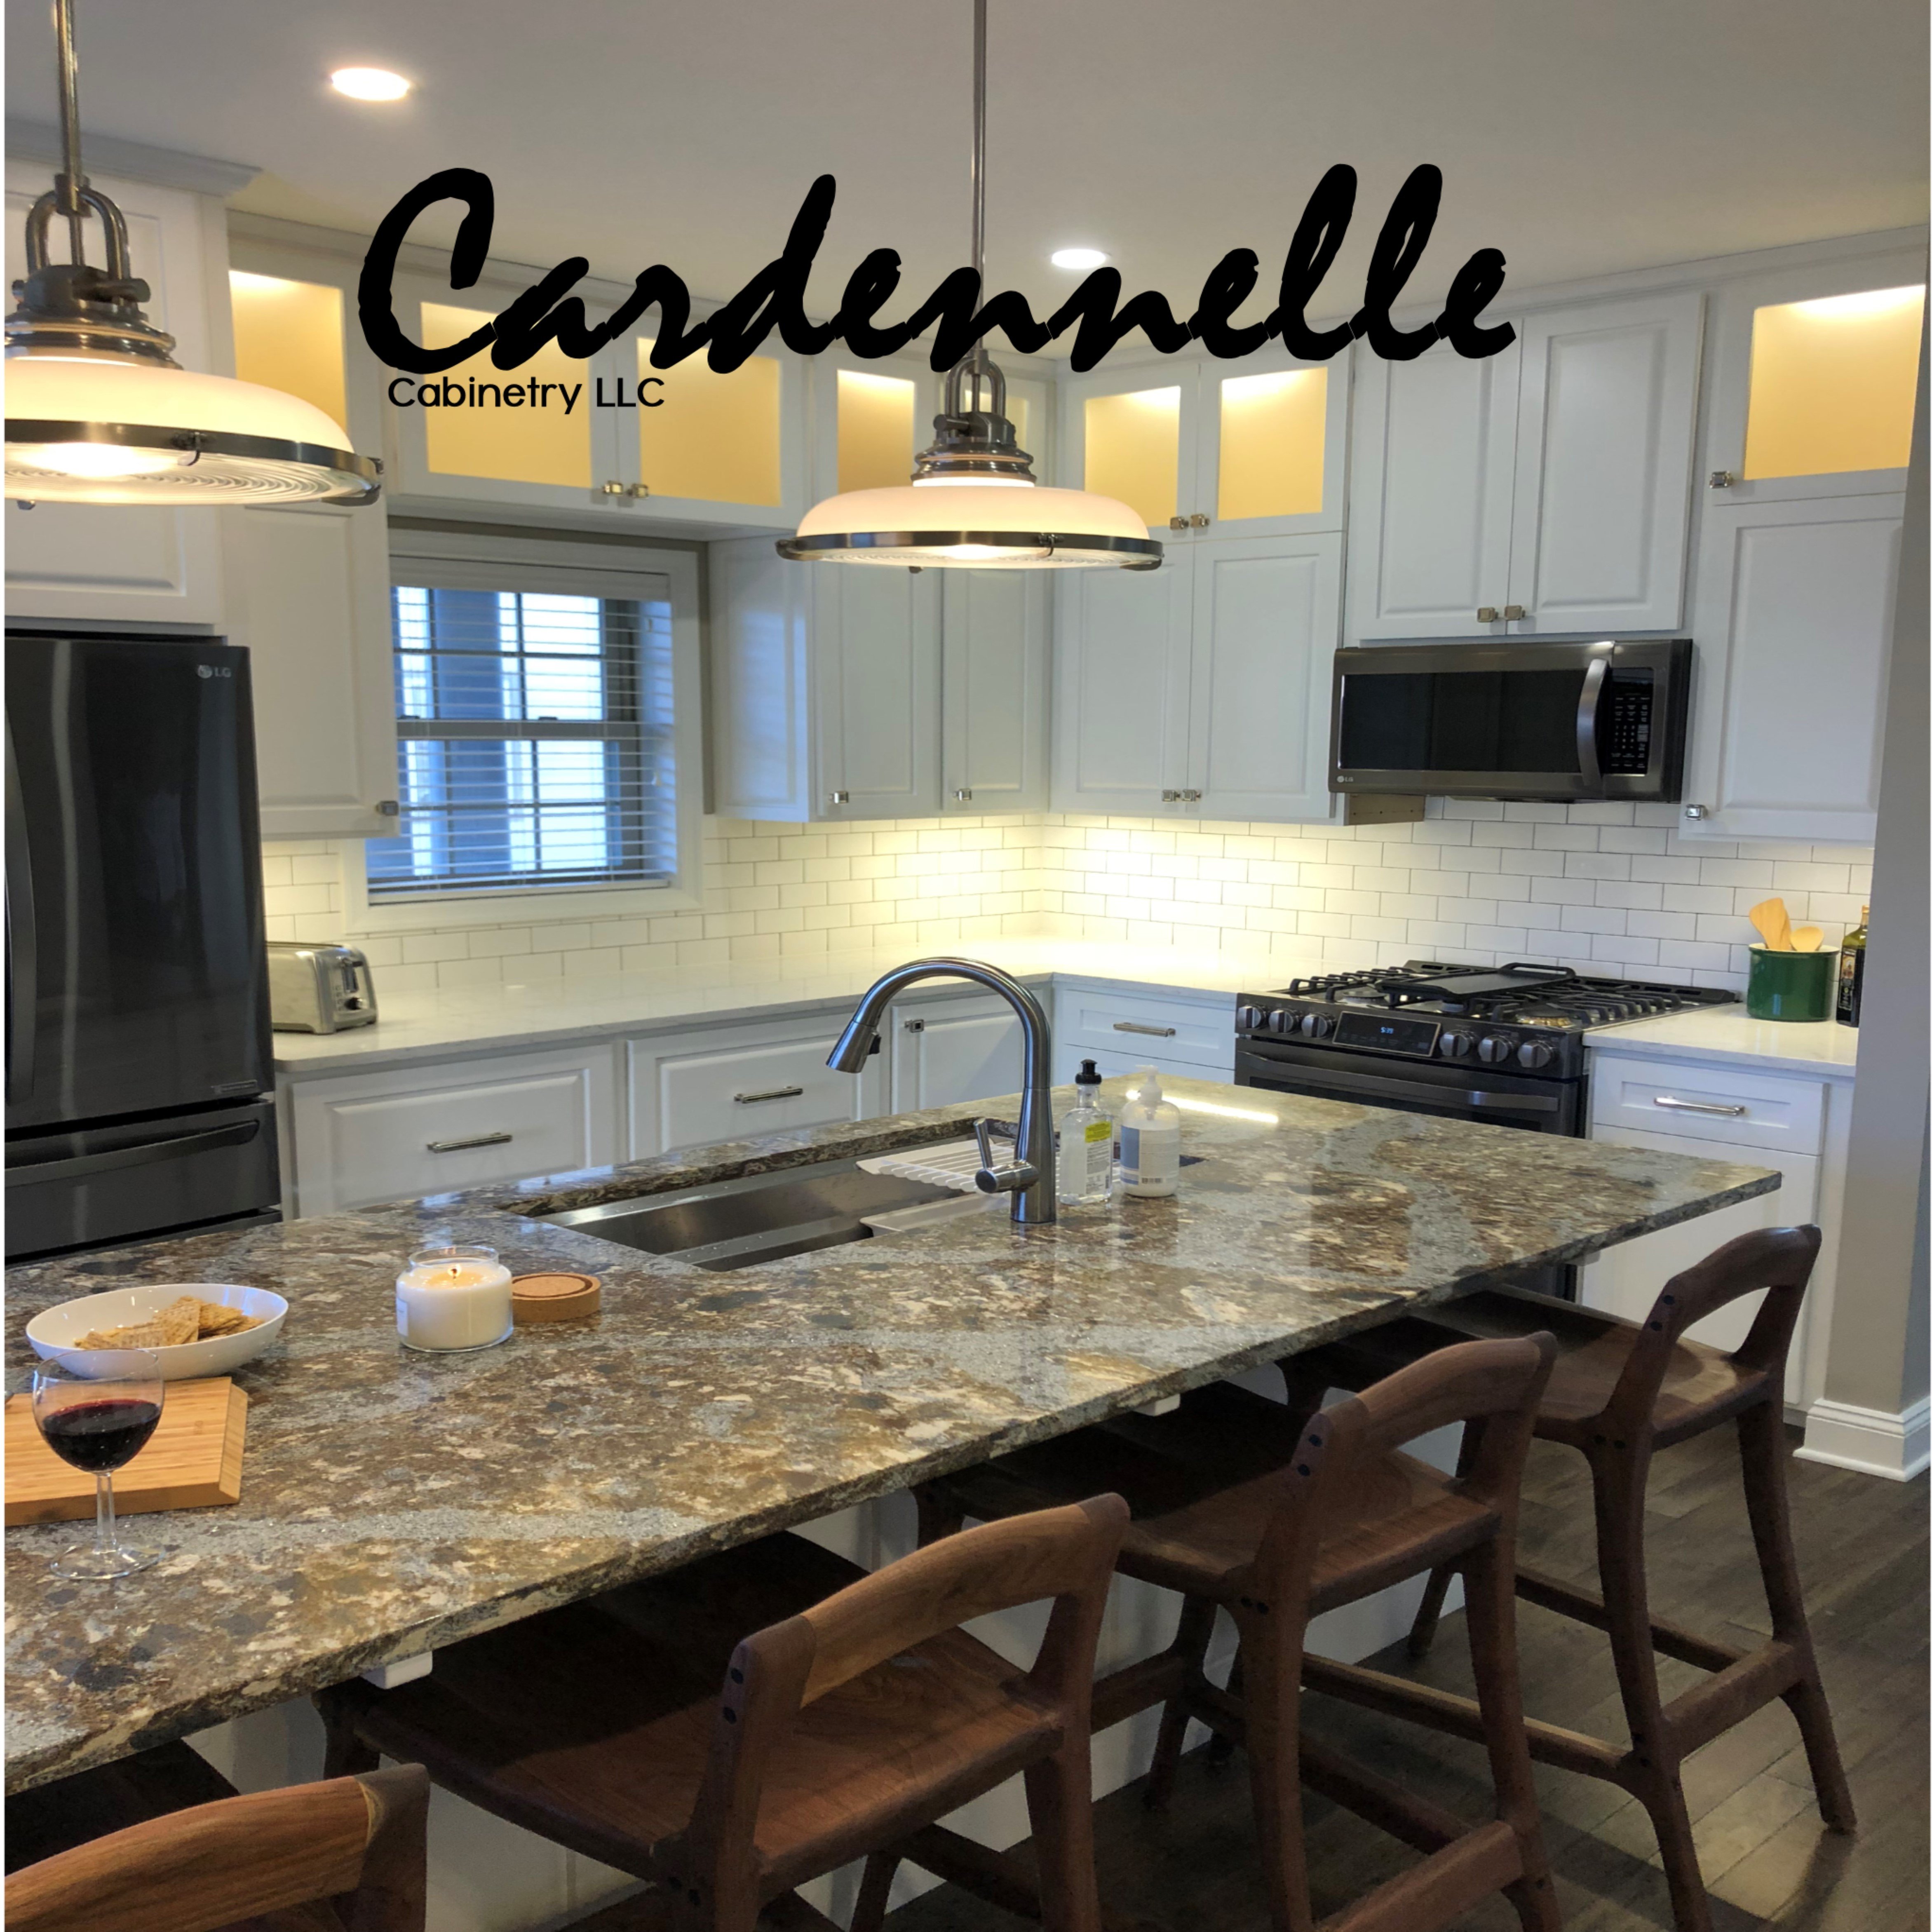 Cardennelle Cabinetry, LLC Logo